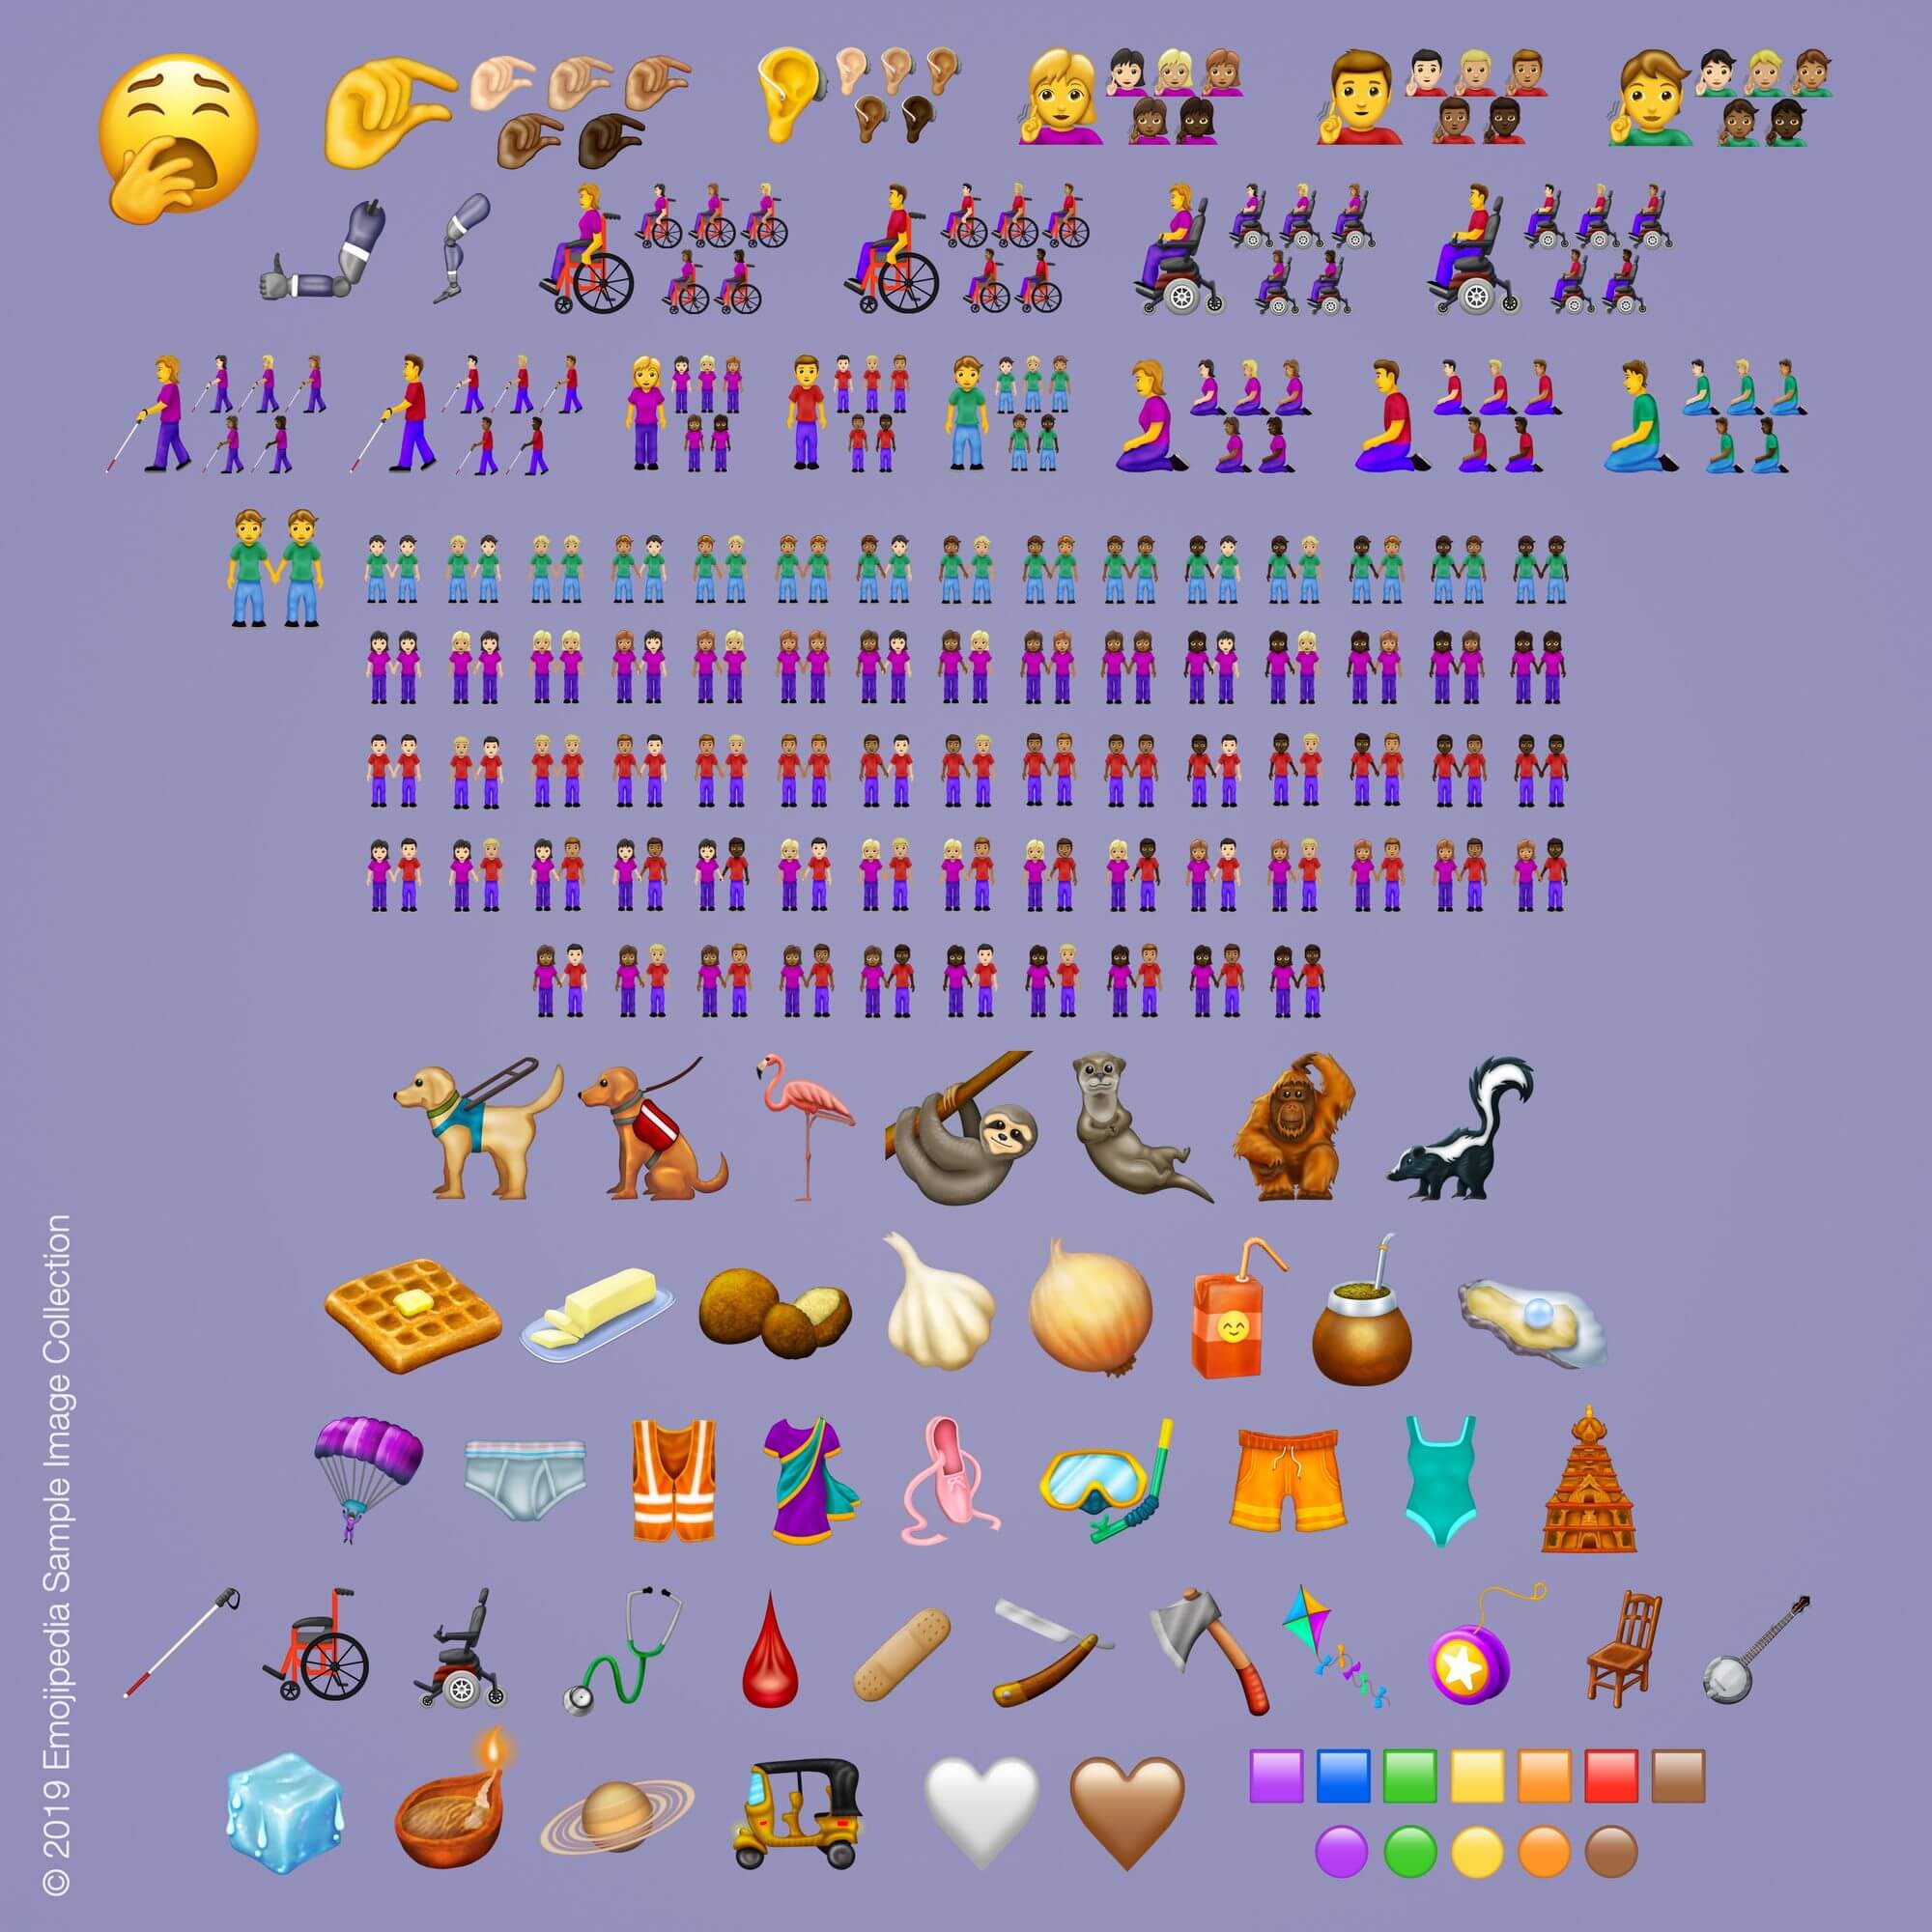 230 new emojis are coming in 2019